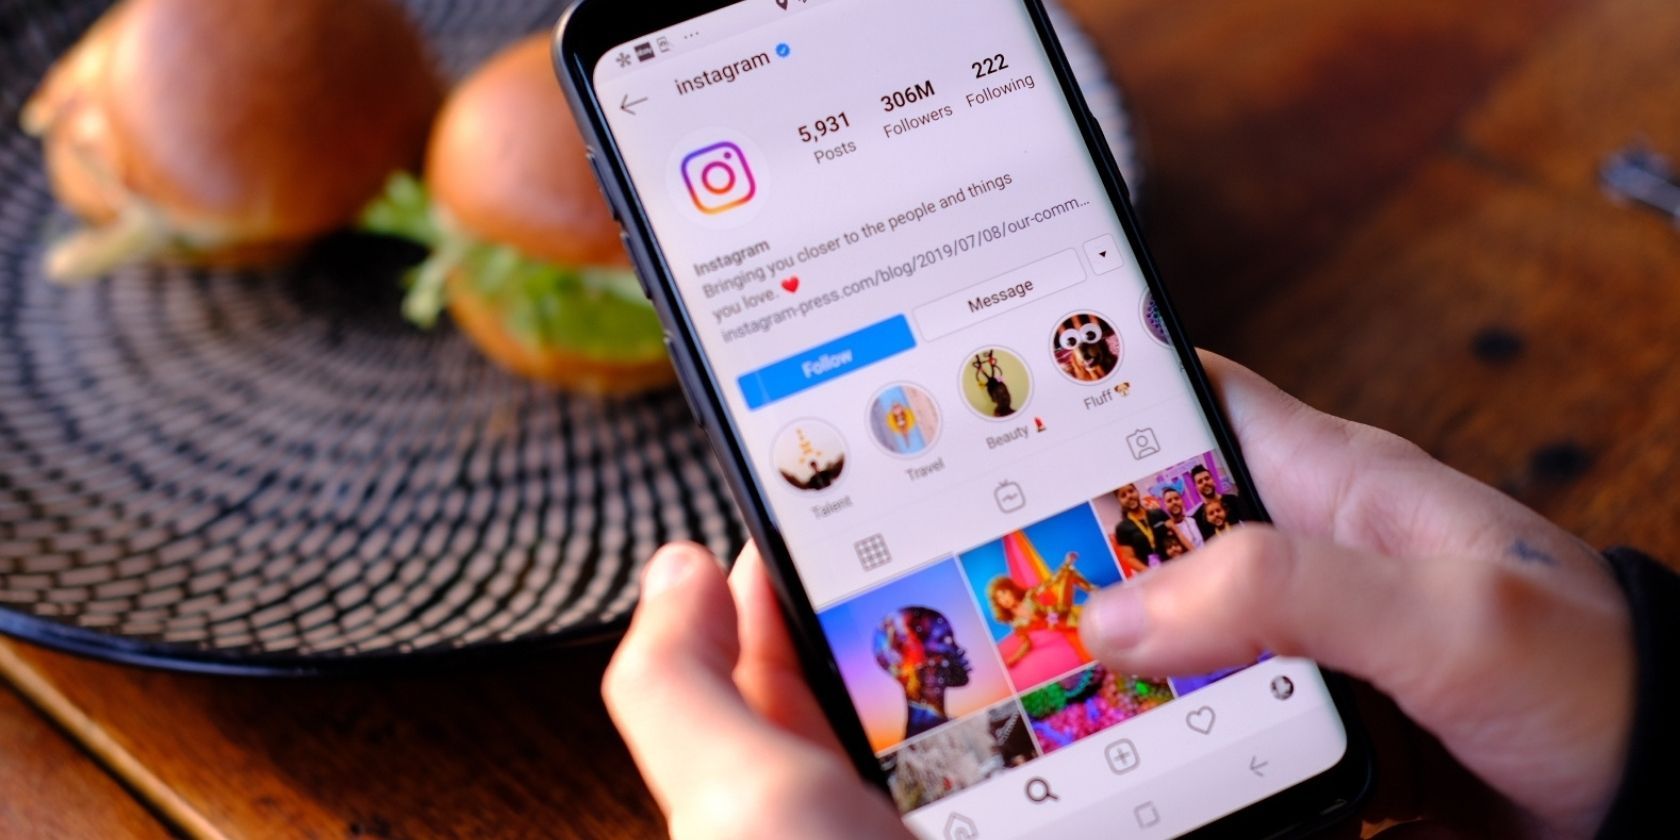 How to View Instagram Posts Without Signing Up